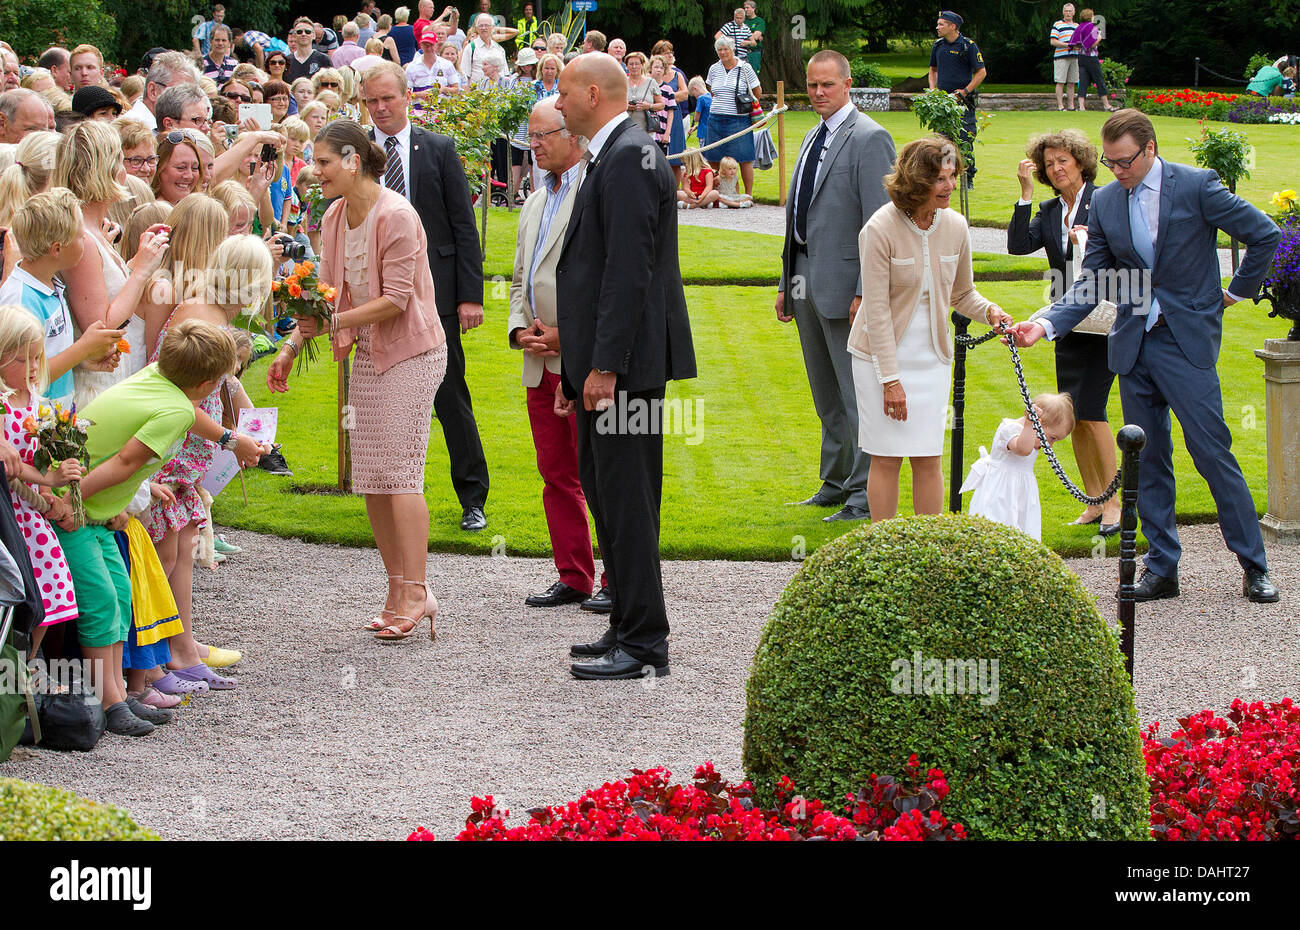 Island Oland, Sweden. 14th July, 2013. L-R: Crown Princess Victoria of Sweden, King Carl Gustav, Queen Silvia, Princess Estelle, and Prince Daniel meet wellwishers to celebrate the 36th birthday of crown princess Victoria at Solliden Castle on Oeland, Sweden Sunday 14 July 2013, Photo: Albert Nieboer/ / /dpa/Alamy Live News Stock Photo